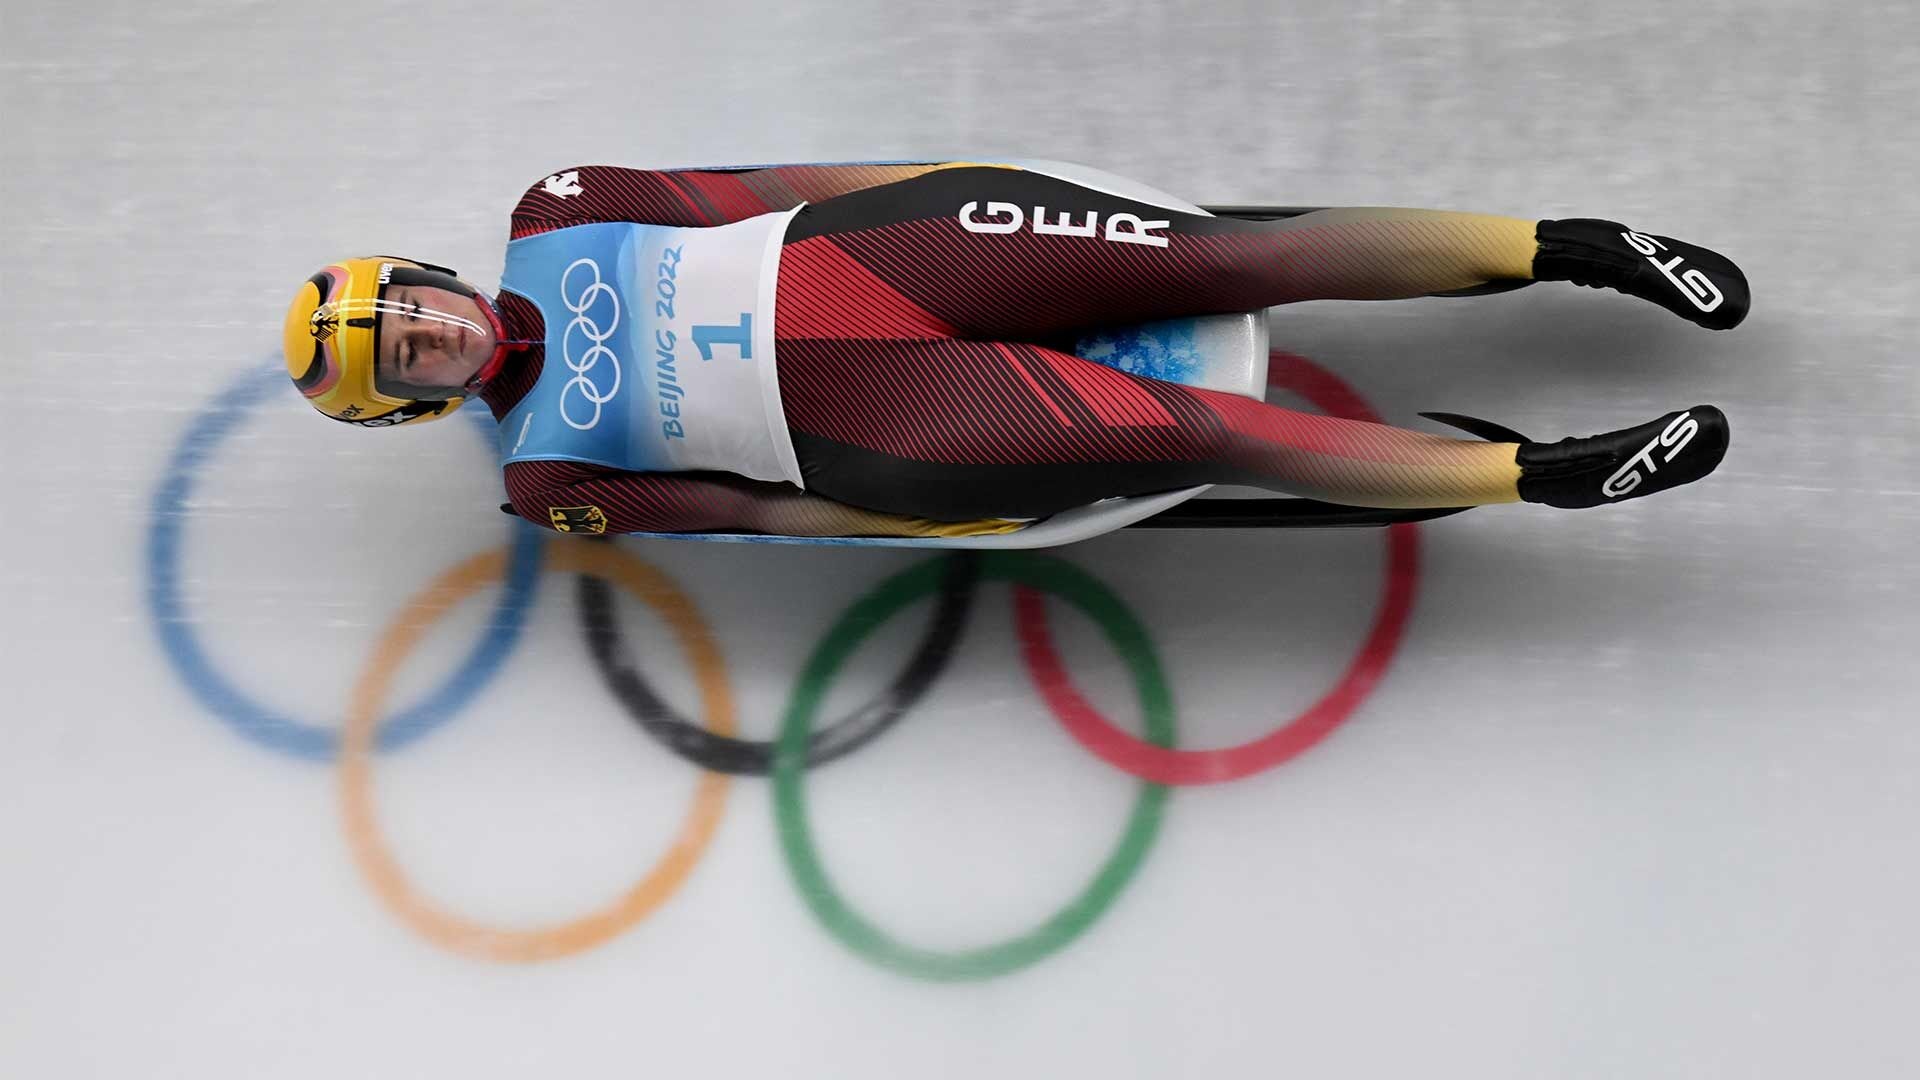 Luge: Natalie Geisenberger, A German luger, A nine-time World champion and six-time Olympic champion. 1920x1080 Full HD Background.